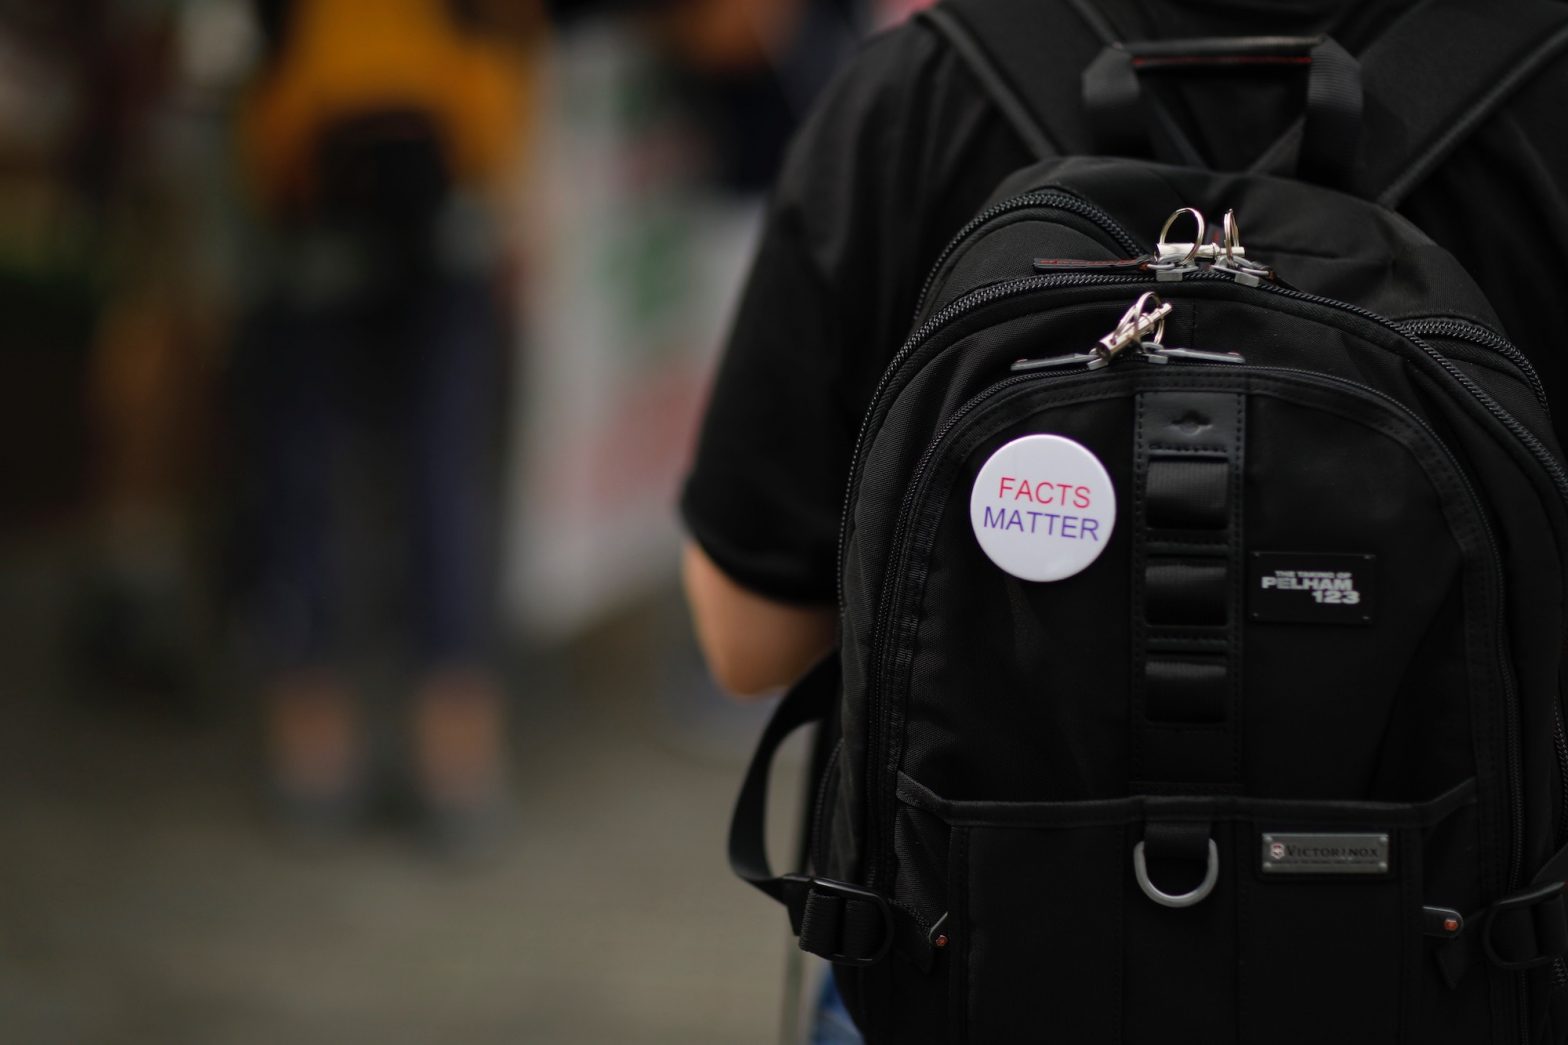 Facts Matter pin on a backpack